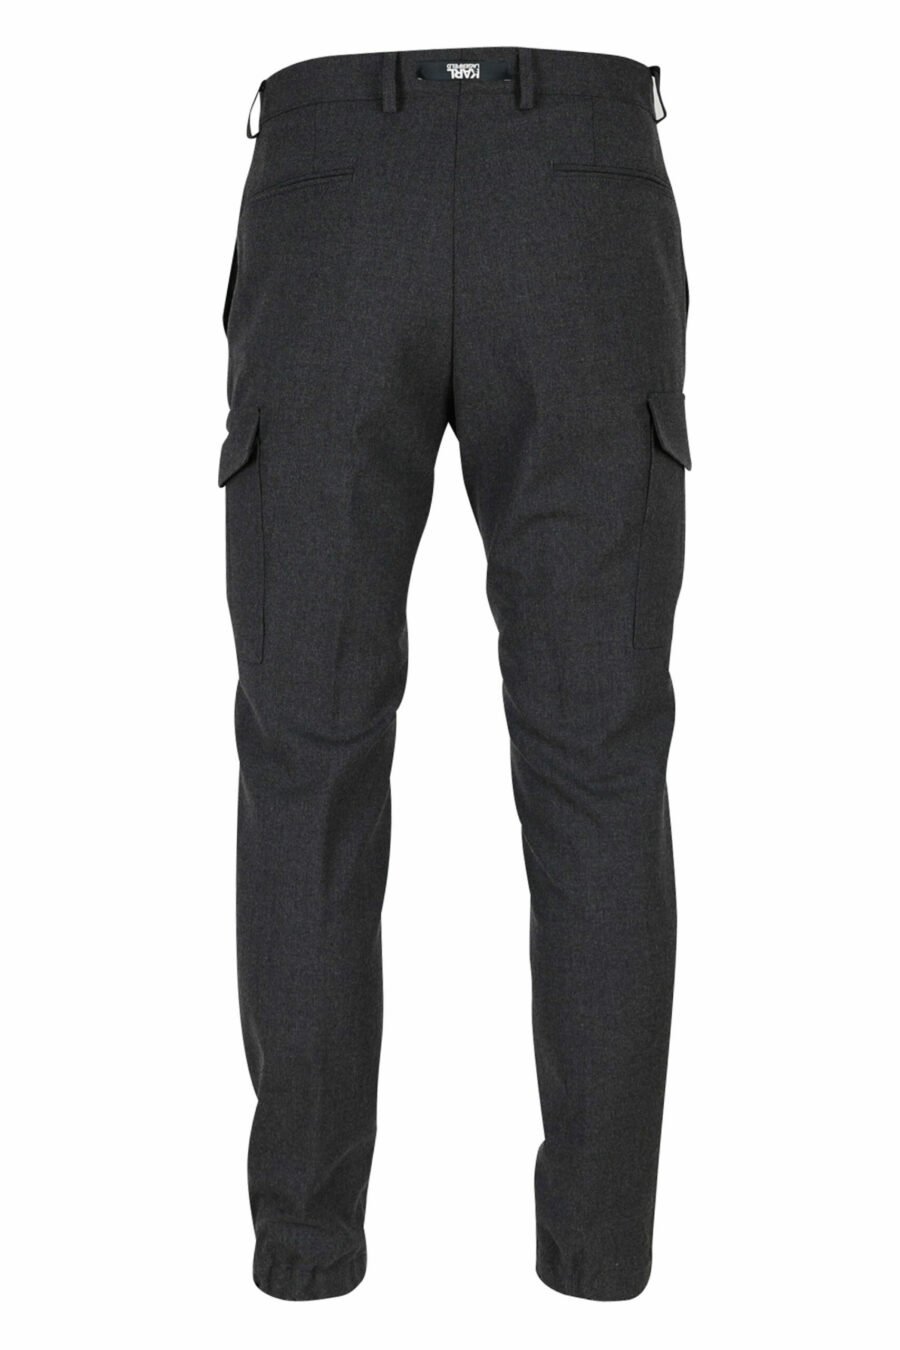 Grey suit trousers - 4062226397018 14 scaled